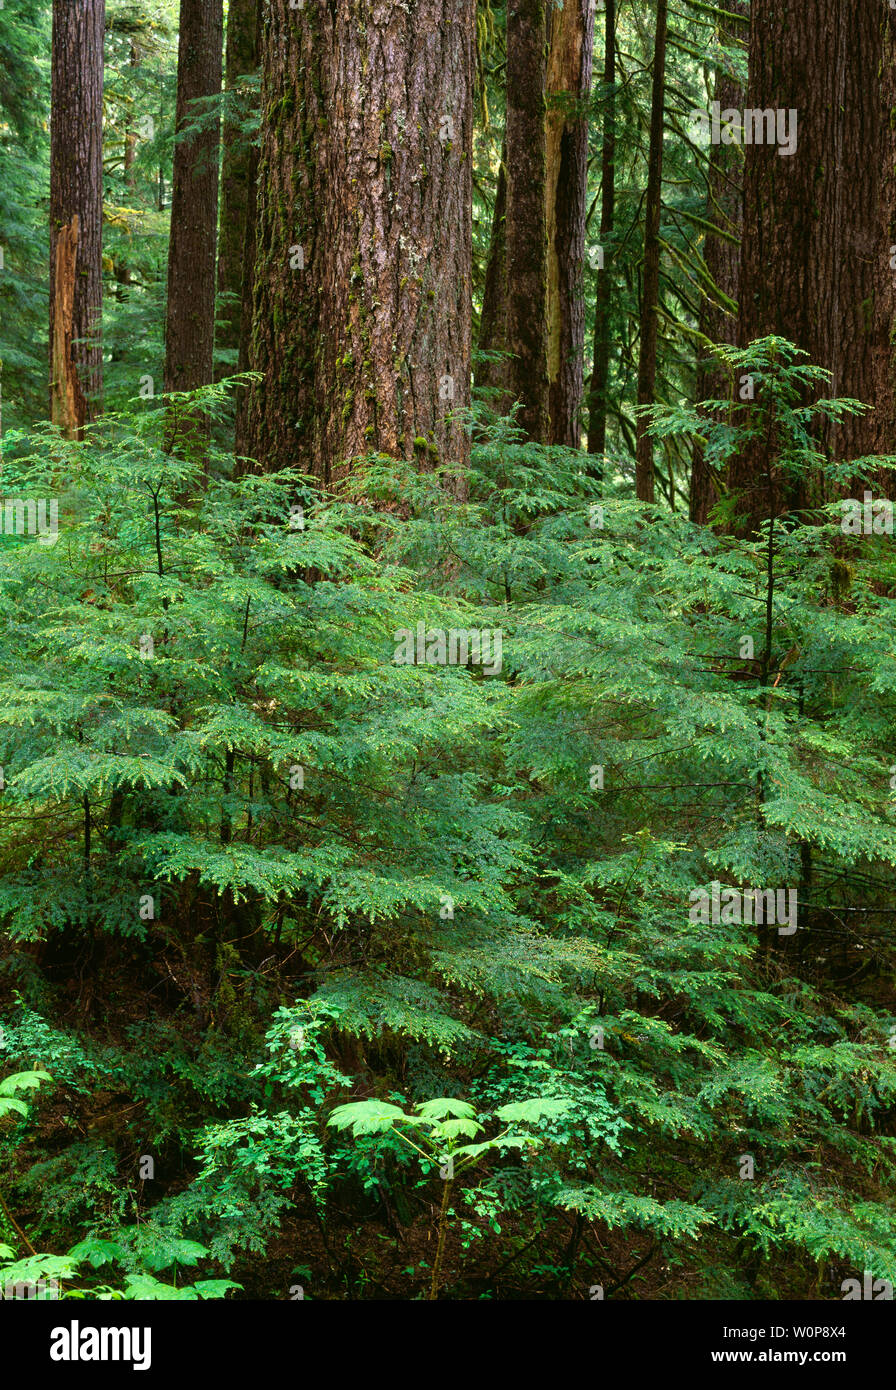 USA, Washington, Olympic National Park, Rain forest with young western hemlock saplings beneath large trunks of mature western hemlock, Sol Duc Valley Stock Photo